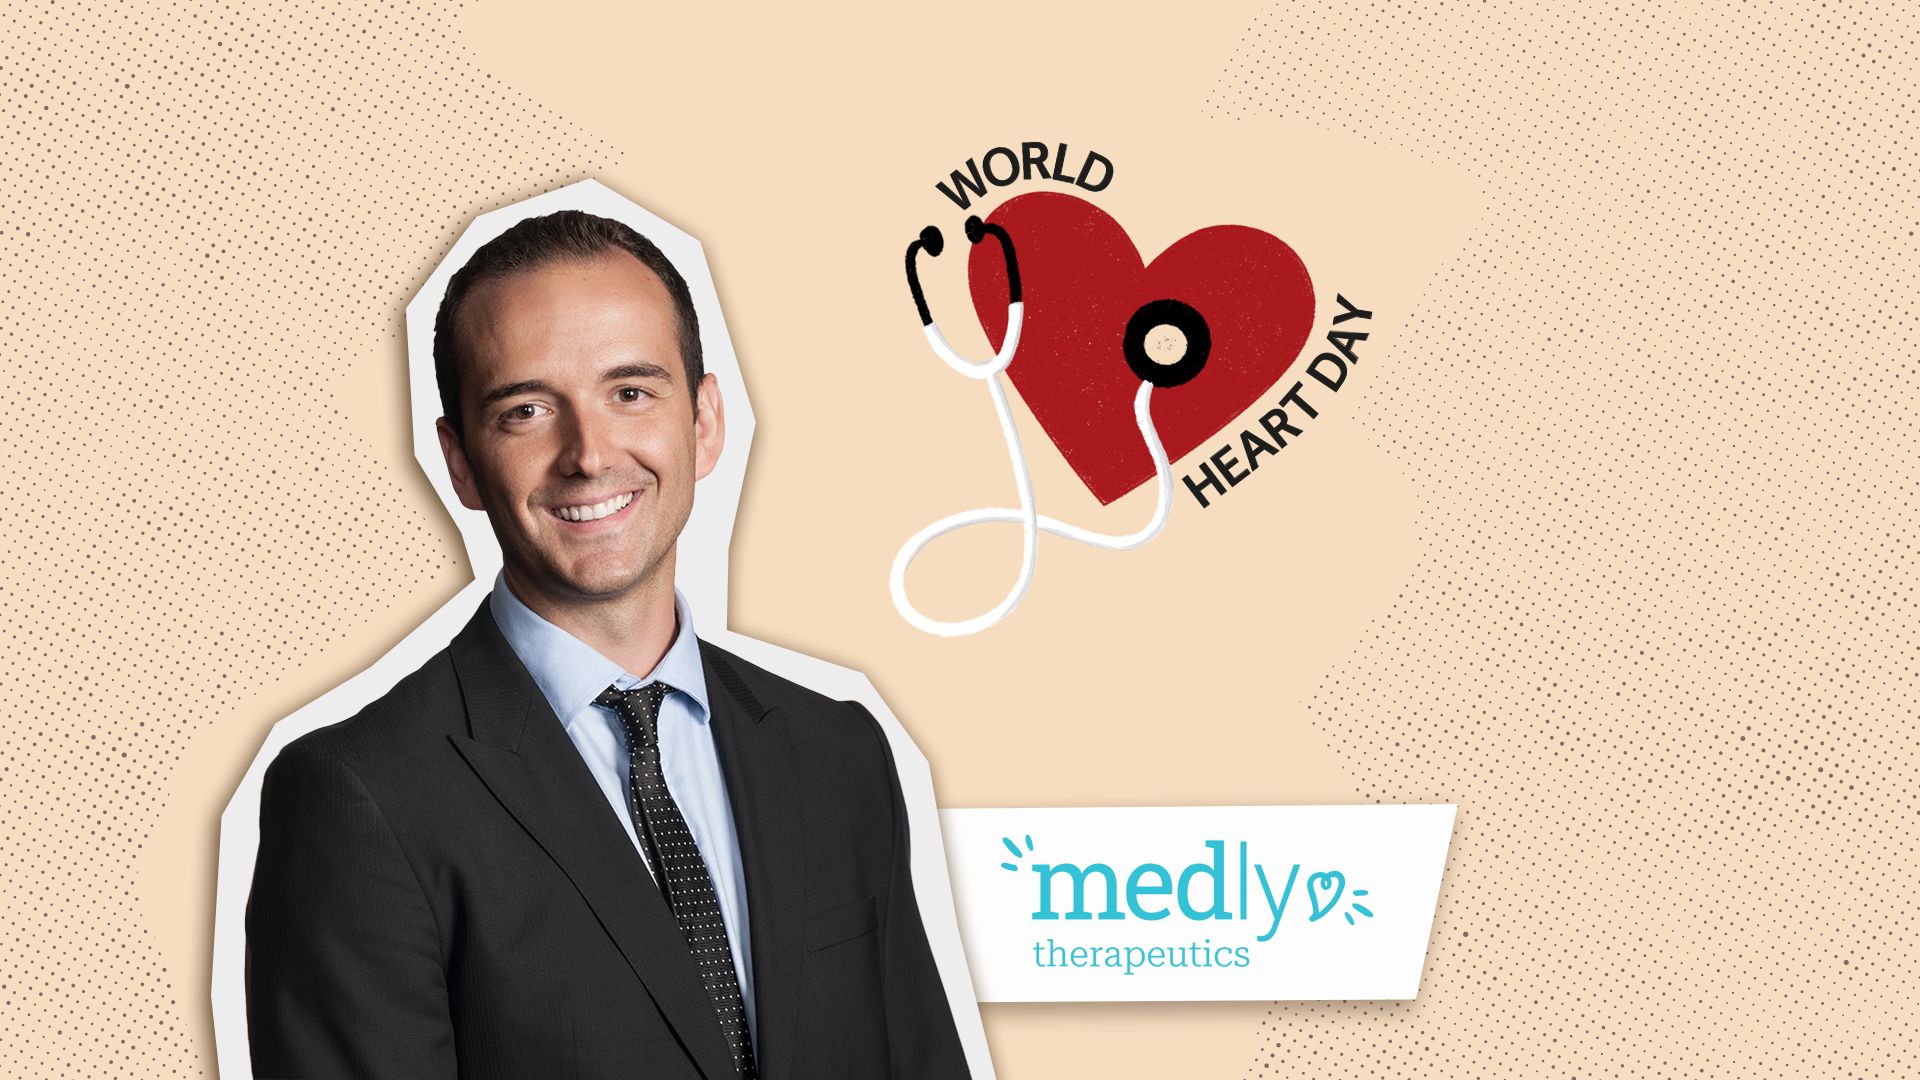 Portrait of Nadan Kapetanovic with the Medly Therapeutics logo and the words "World Heart Day"